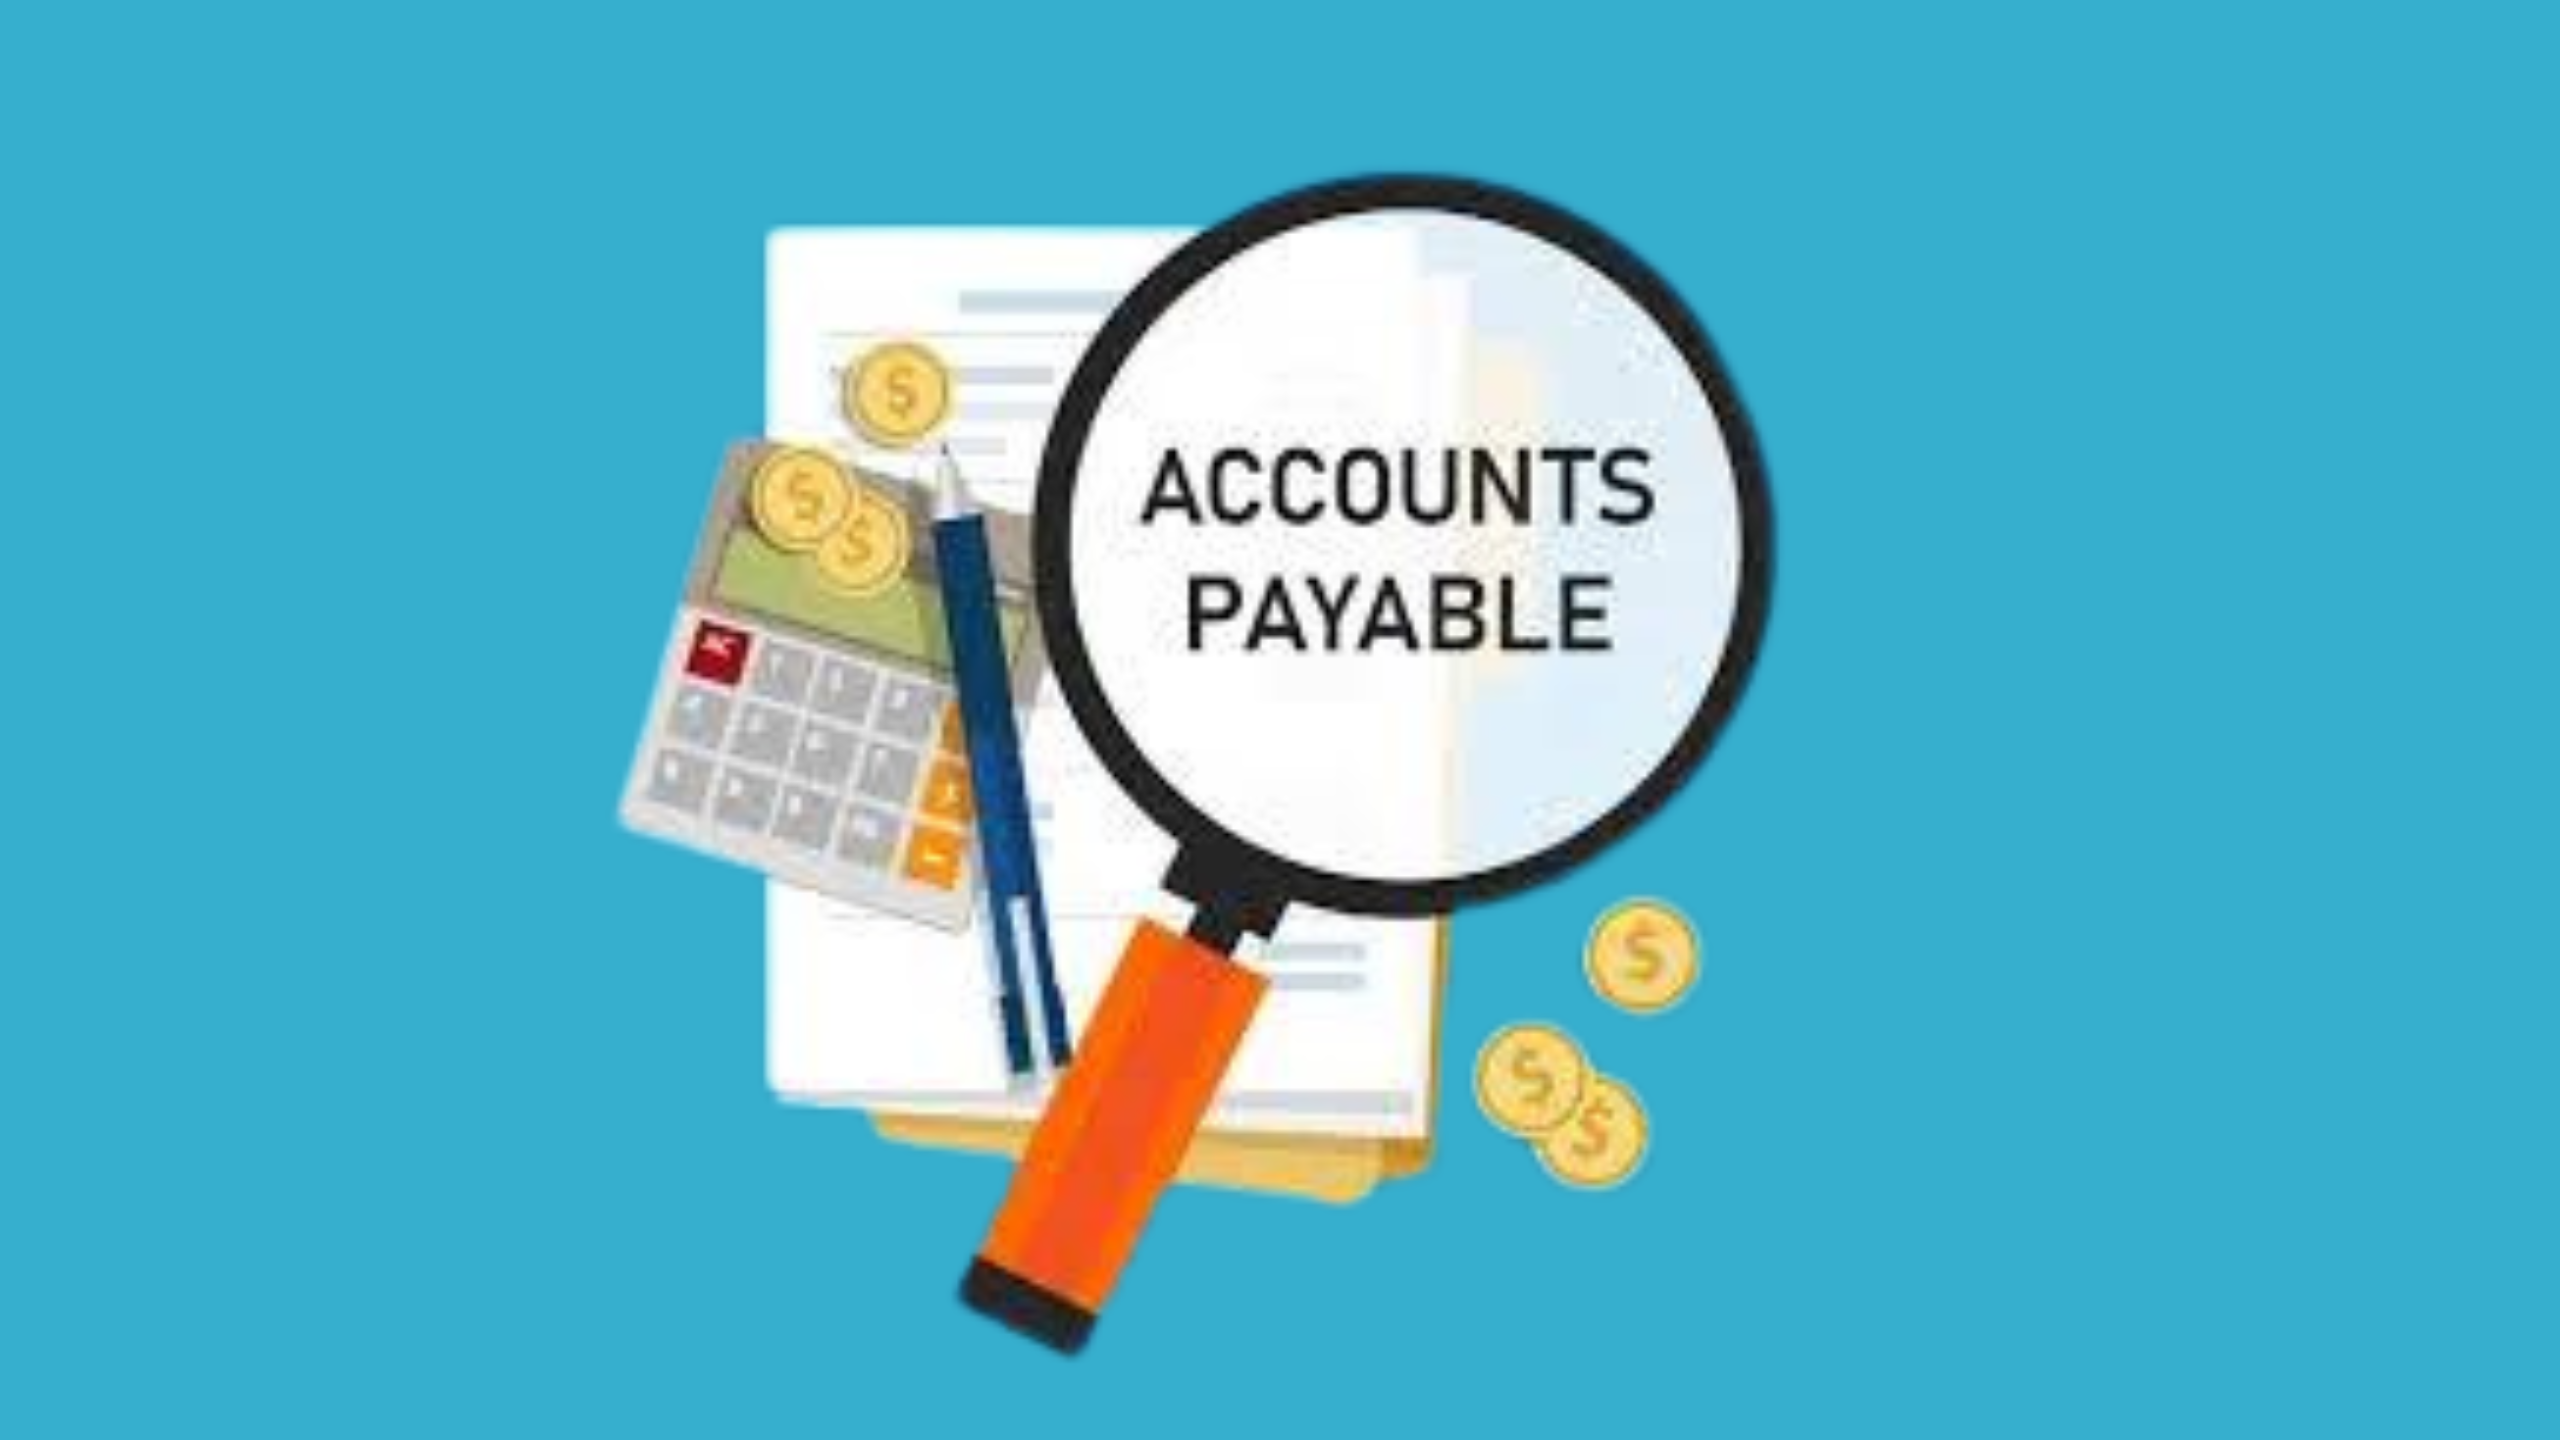 Accounts Payable (AP) is the amount of money that a company owes to its suppliers or vendors for goods or services purchased on credit